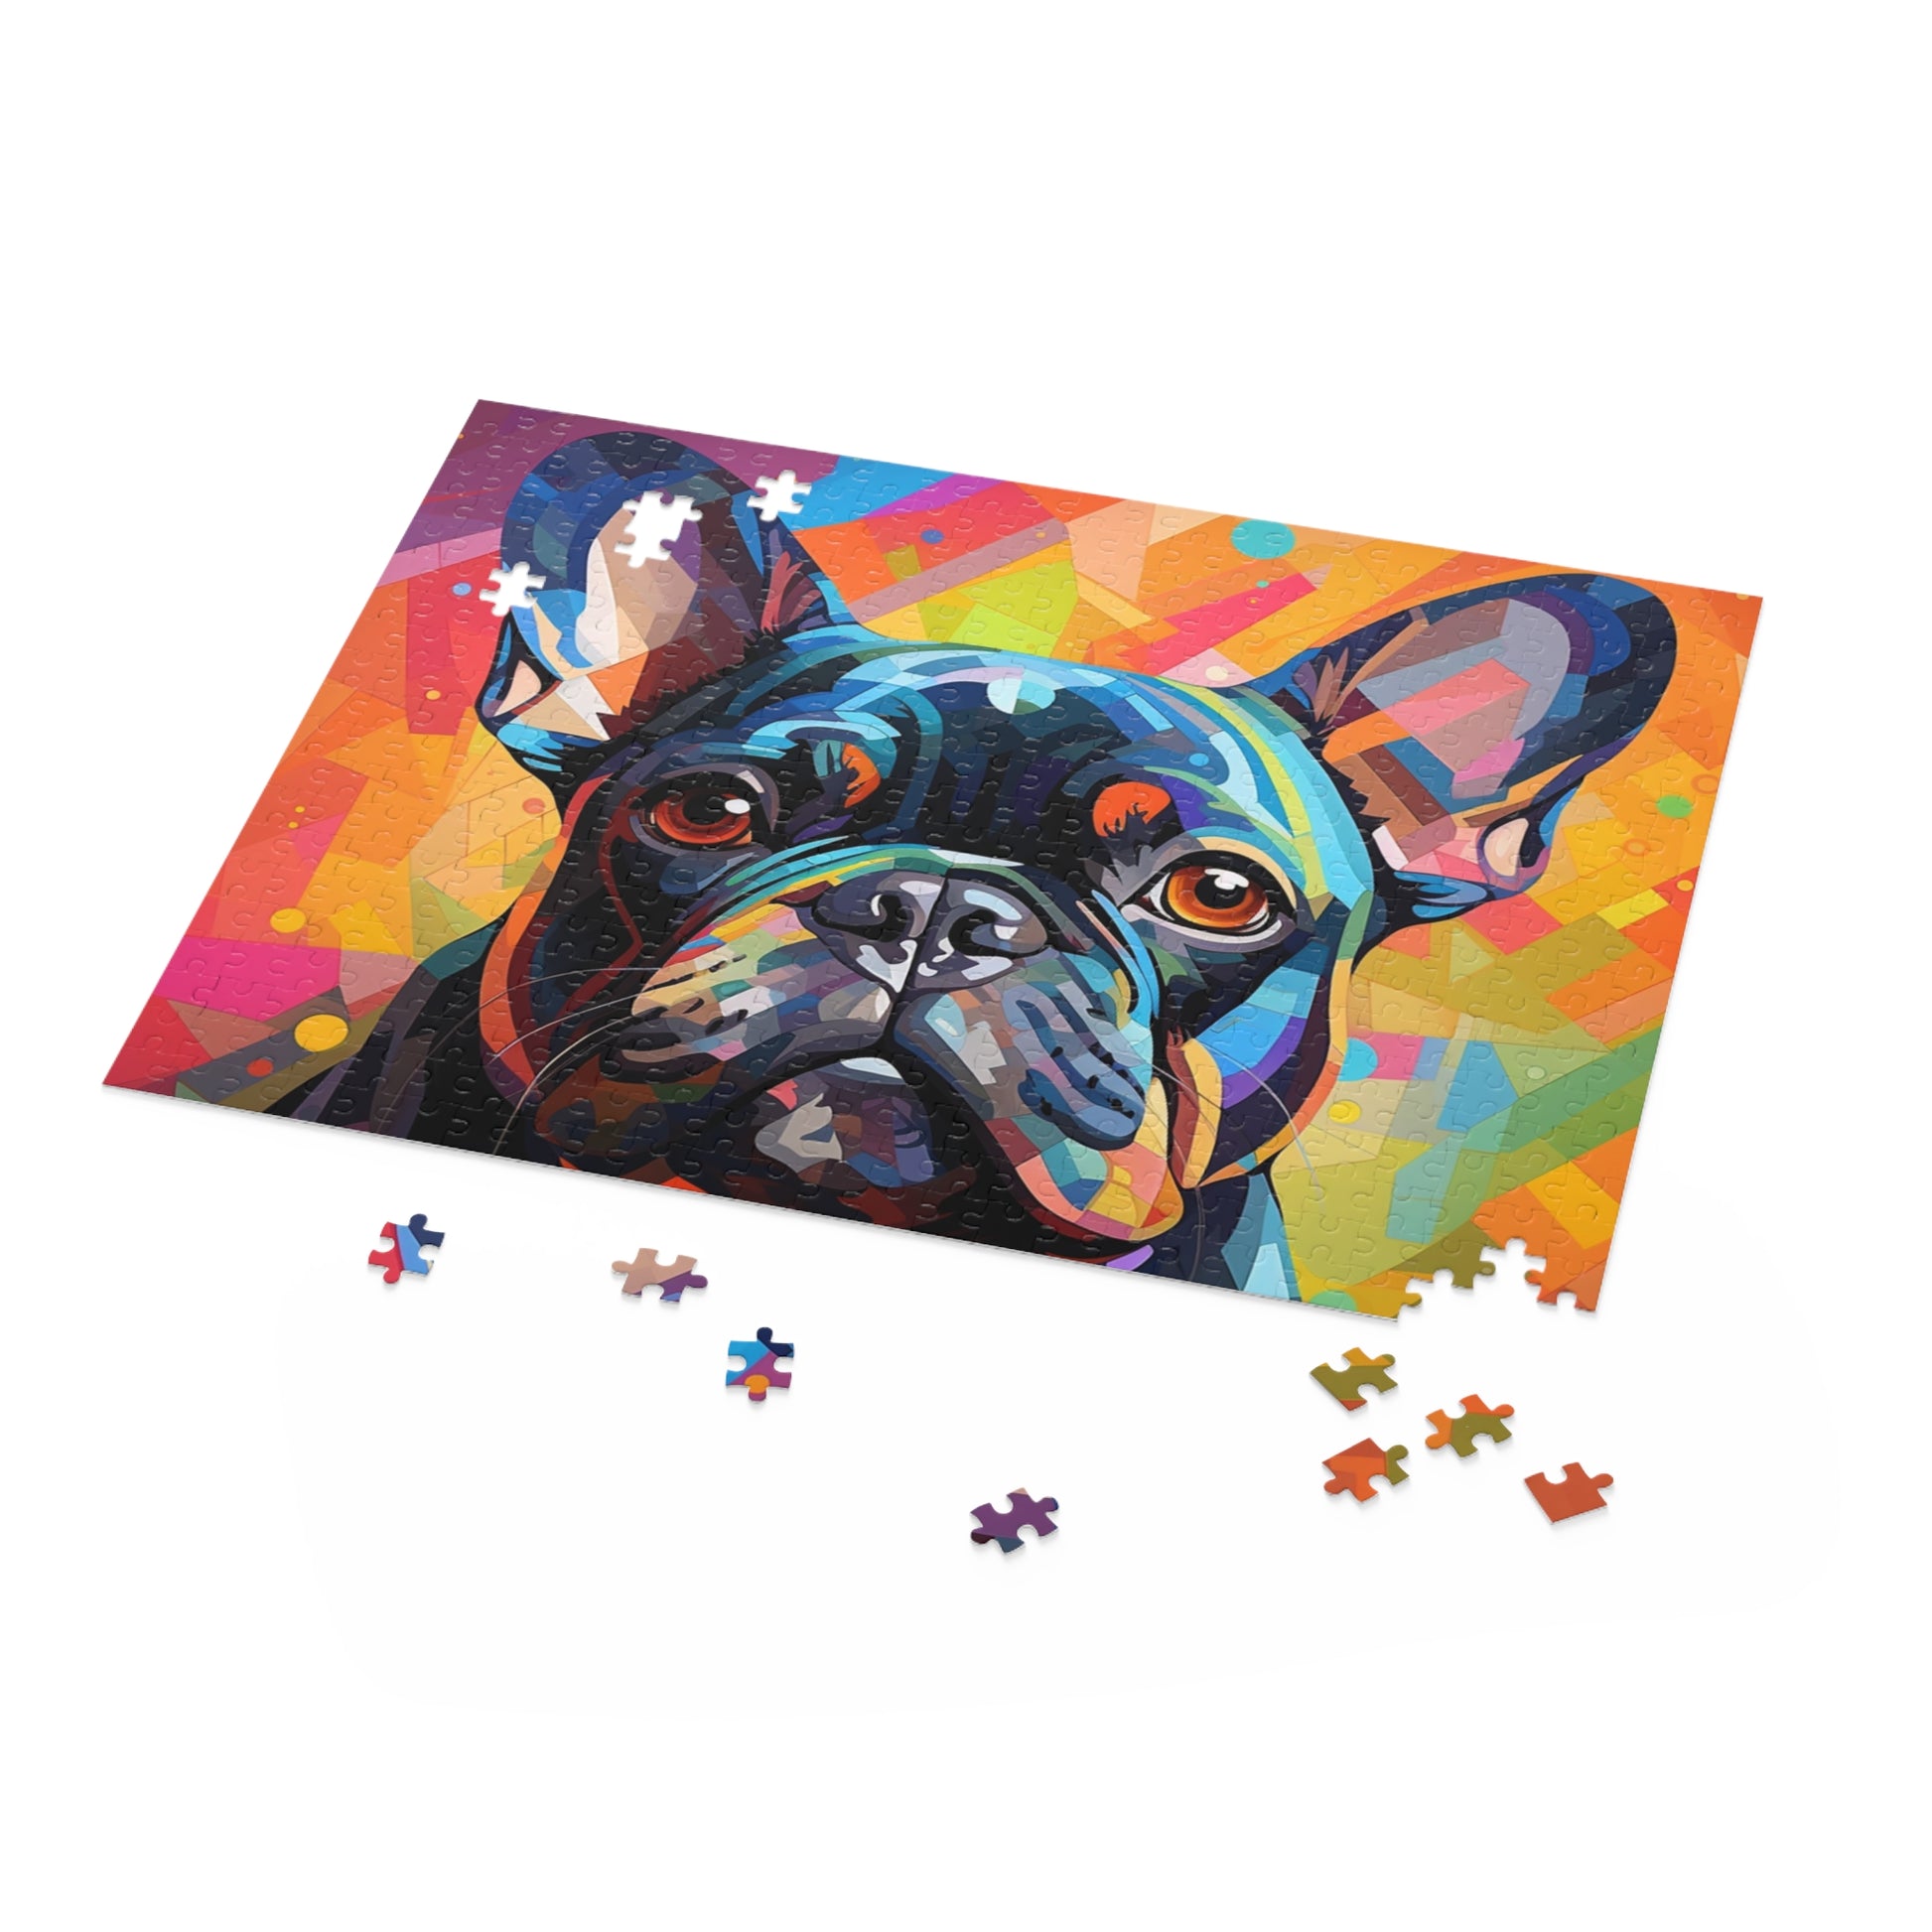 Abstract Frenchie Oil Paint Dog Jigsaw Puzzle Adult Birthday Business Jigsaw Puzzle Gift for Him Funny Humorous Indoor Outdoor Game Gift For Her Online-5